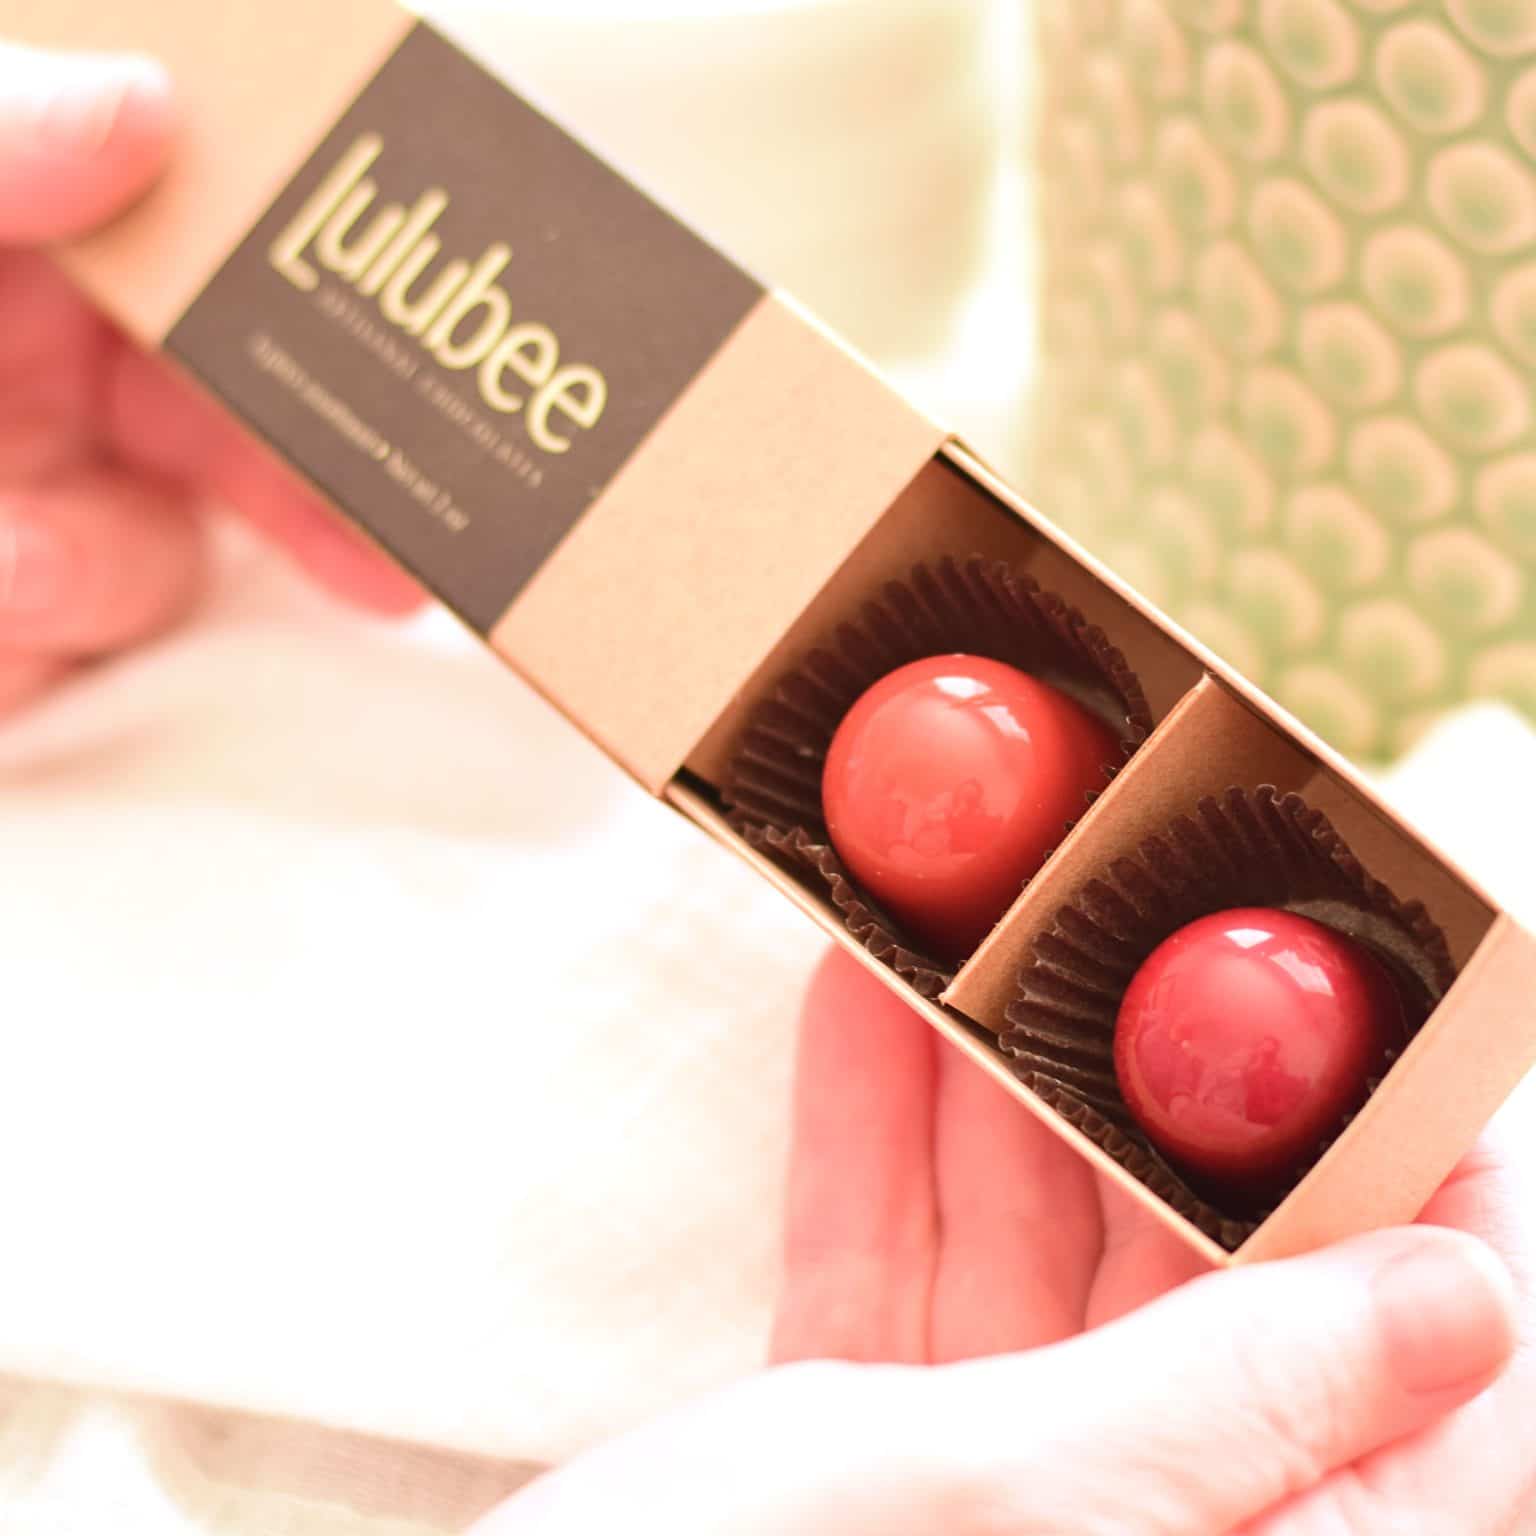 Person holding a 6-piece box of gourmet chocolate truffles in shades of red. Box contains a printed label that reads Lulubee Artisanal Chocolates